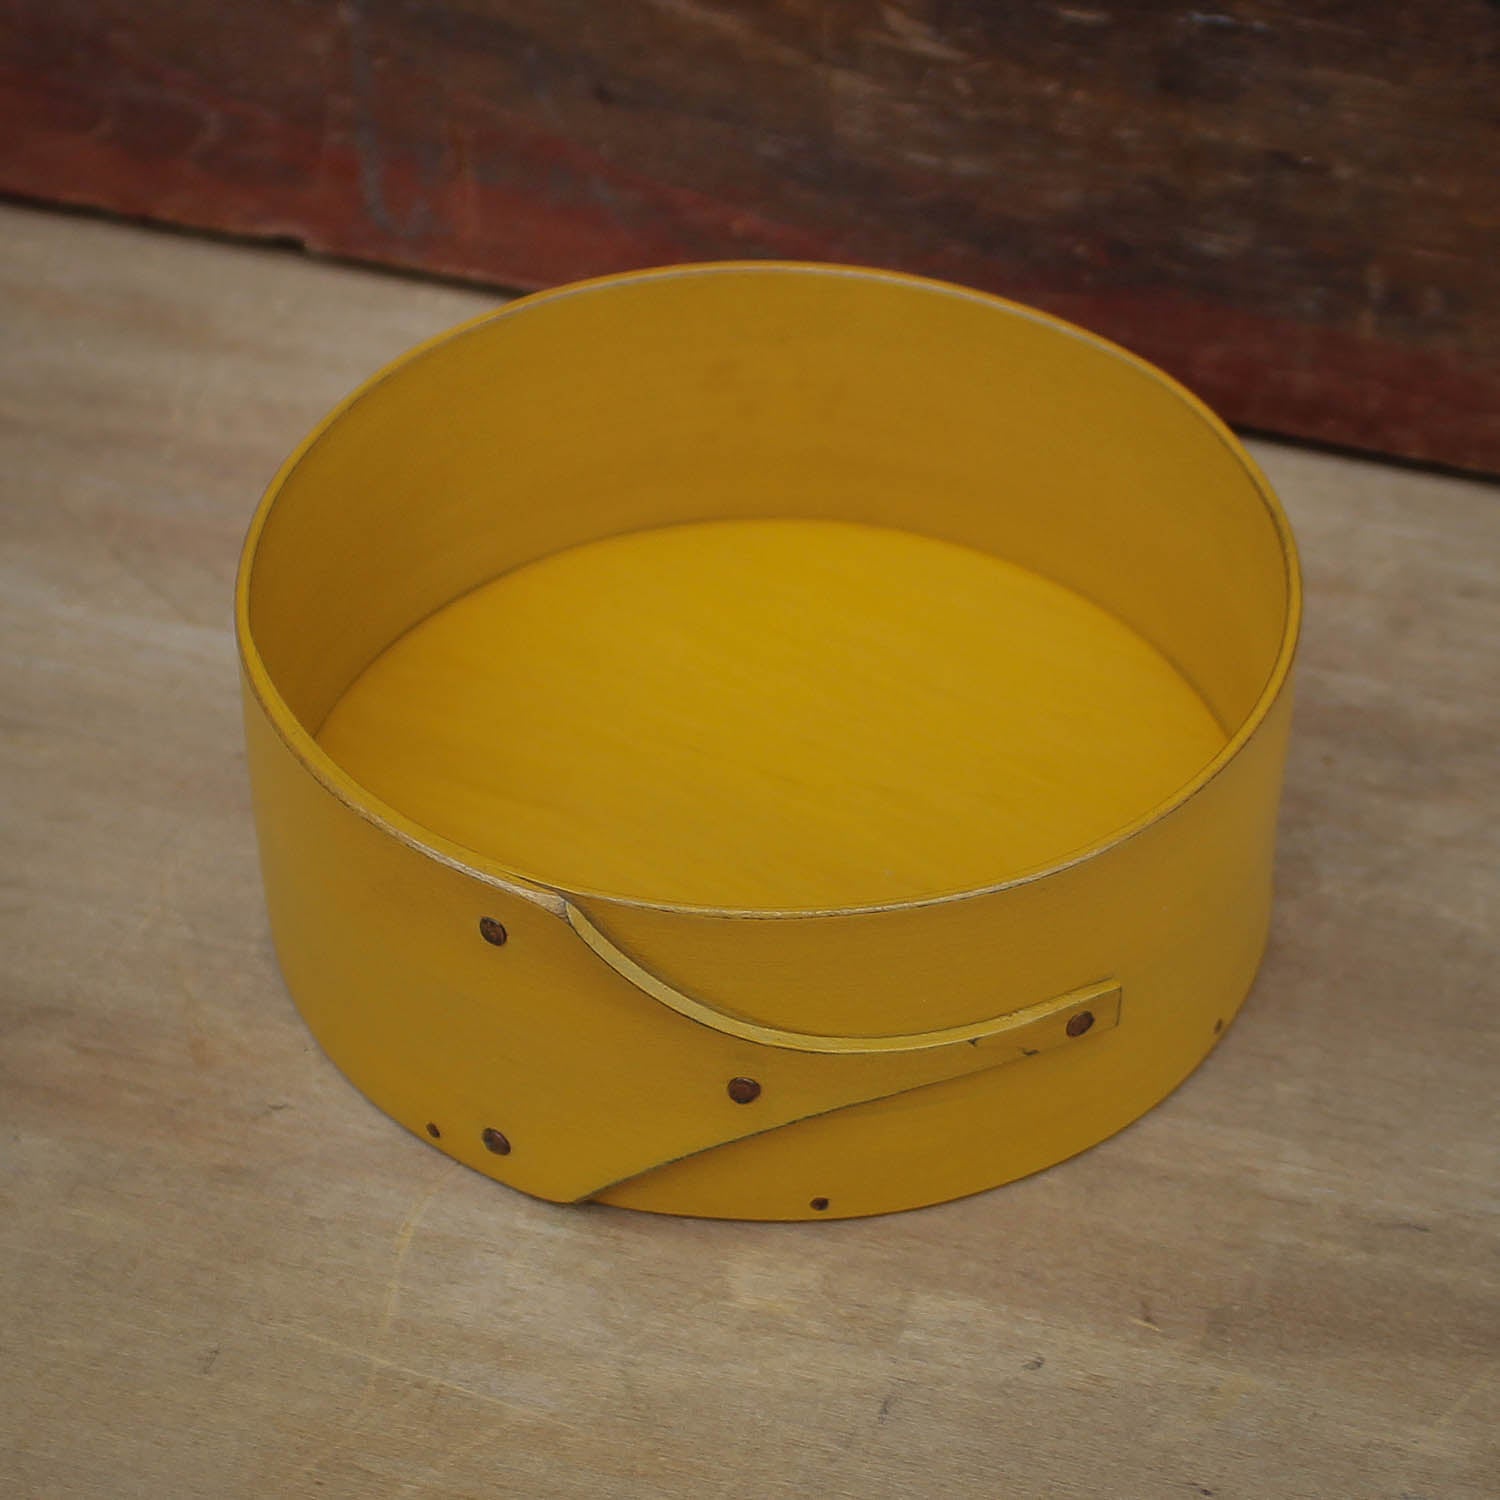 Shaker Style Pin Cushion Base for Needlework, LeHays Shaker Boxes, Handcrafted in Maine, Yellow Milk Paint Finish, Top View